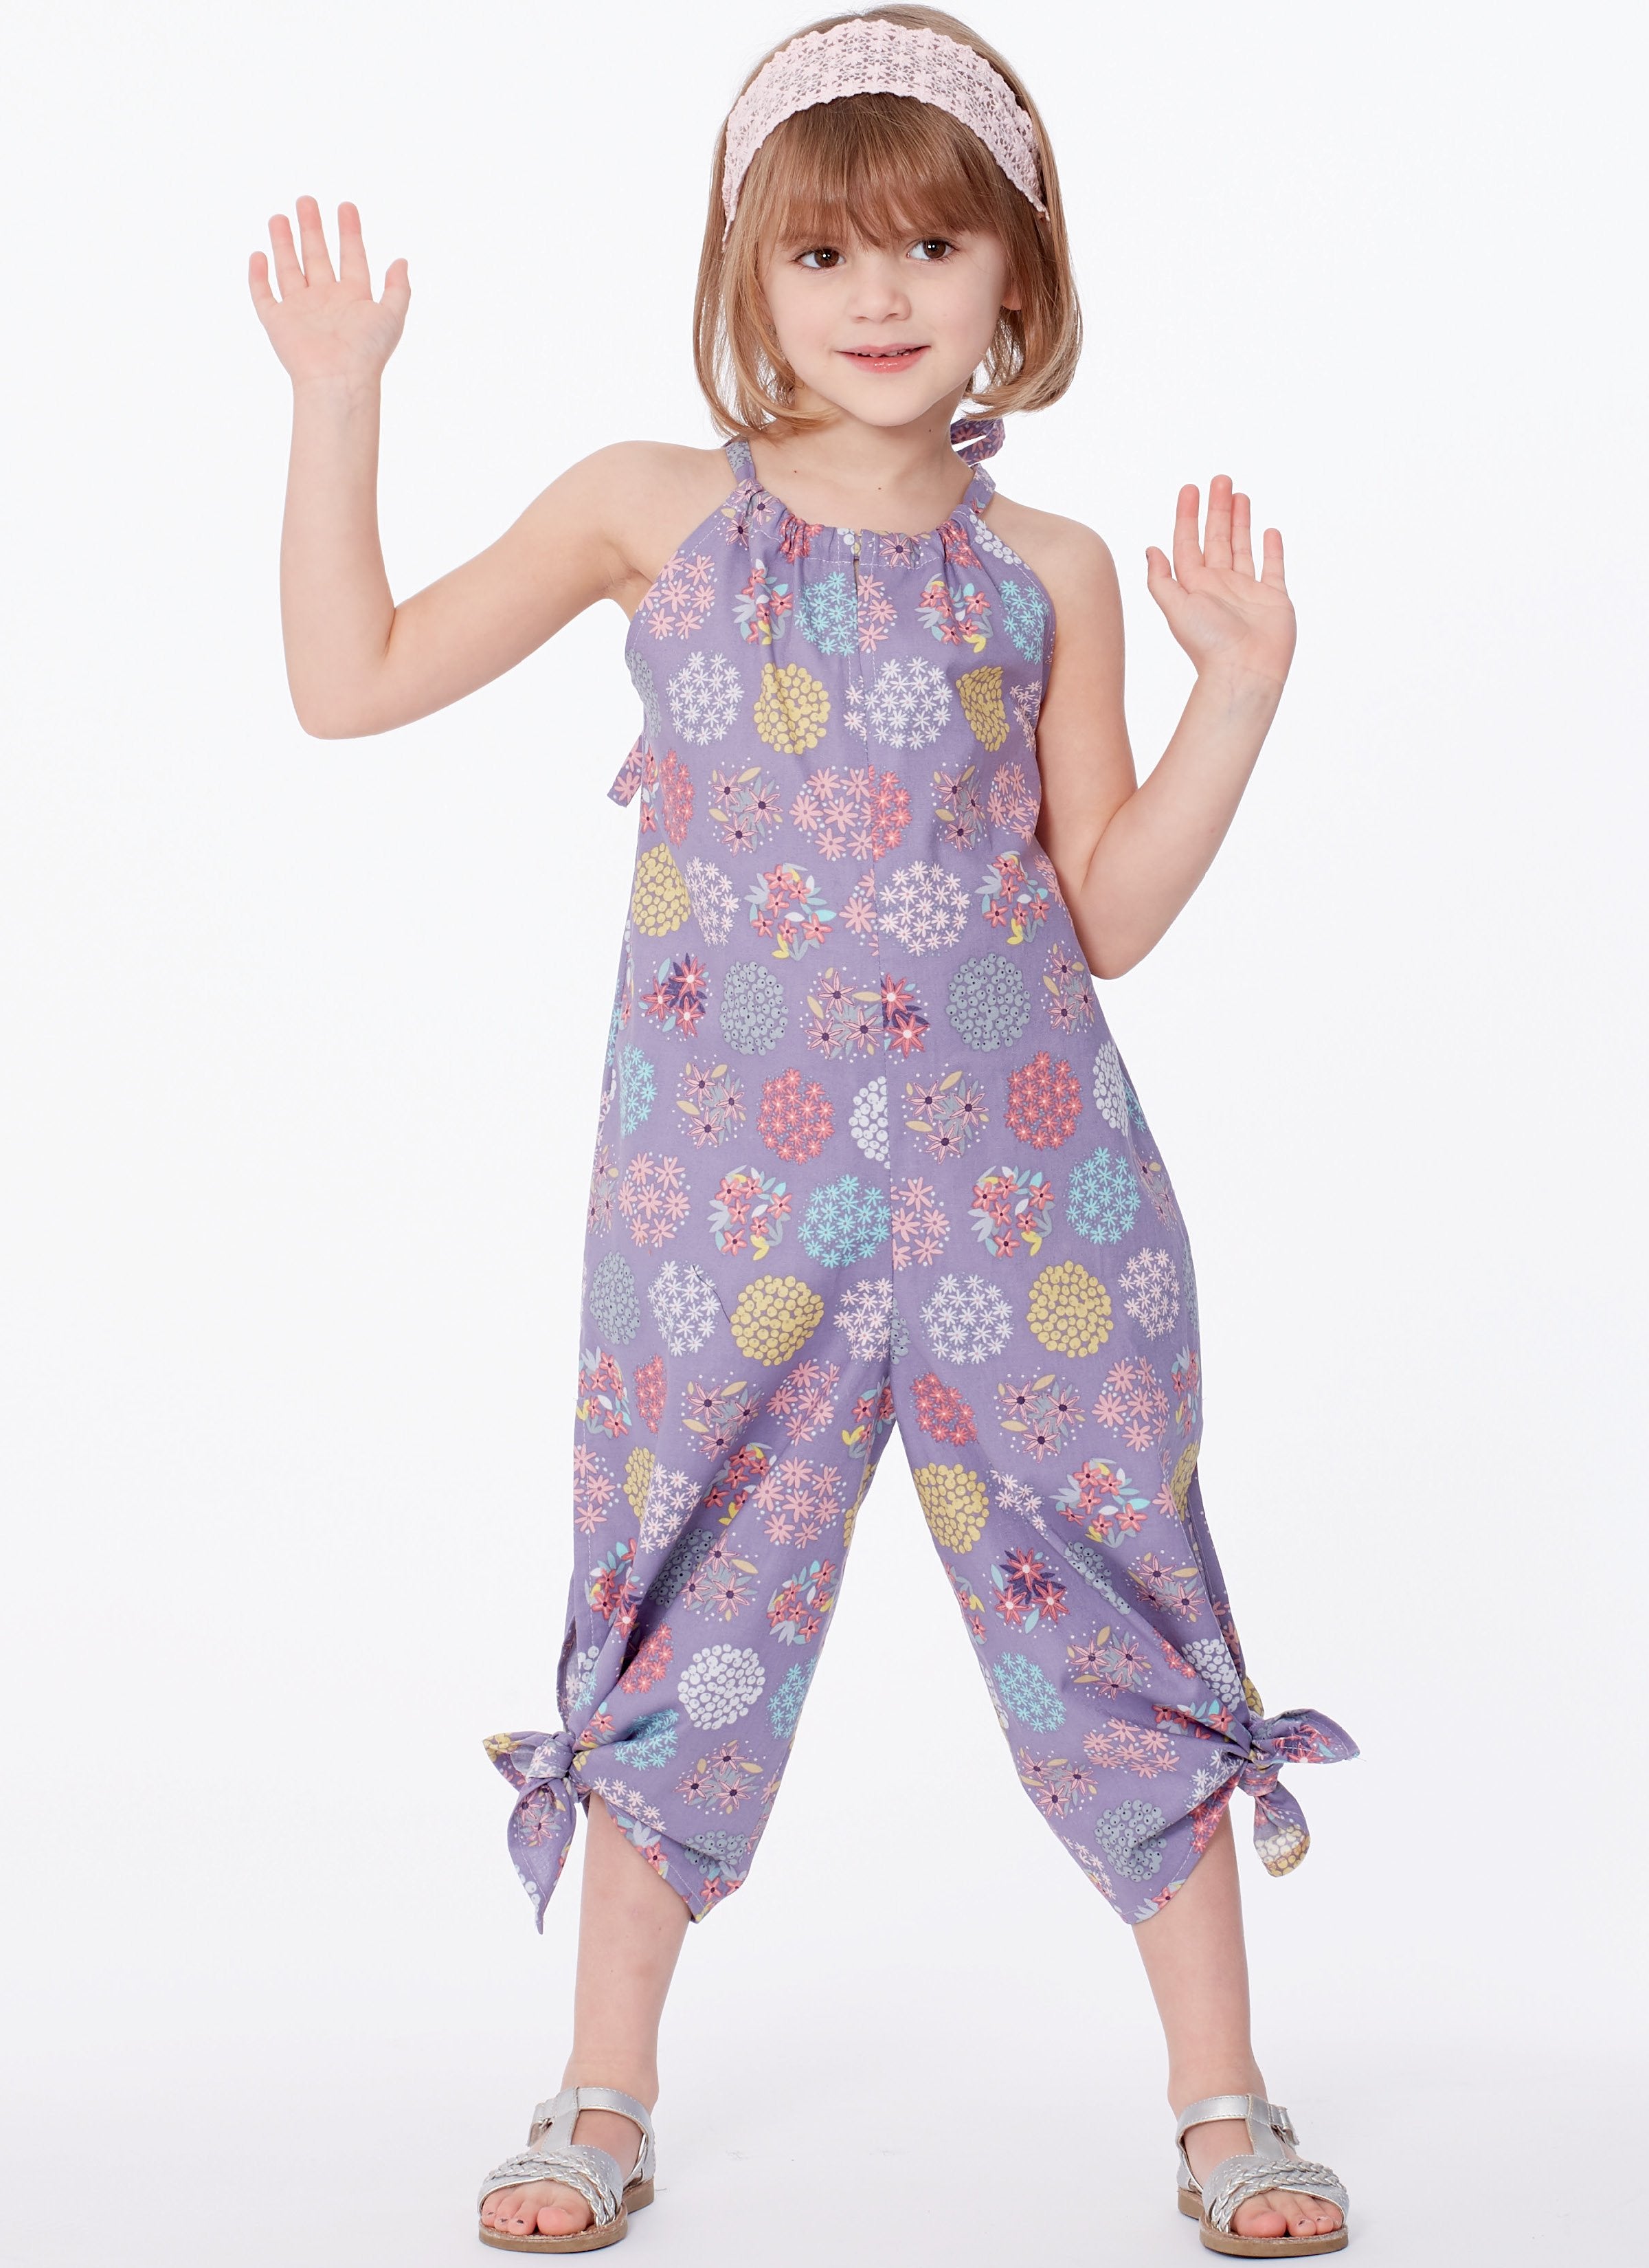 McCall's 7917 Girl's Romper, Jumpsuit and Belt from Jaycotts Sewing Supplies